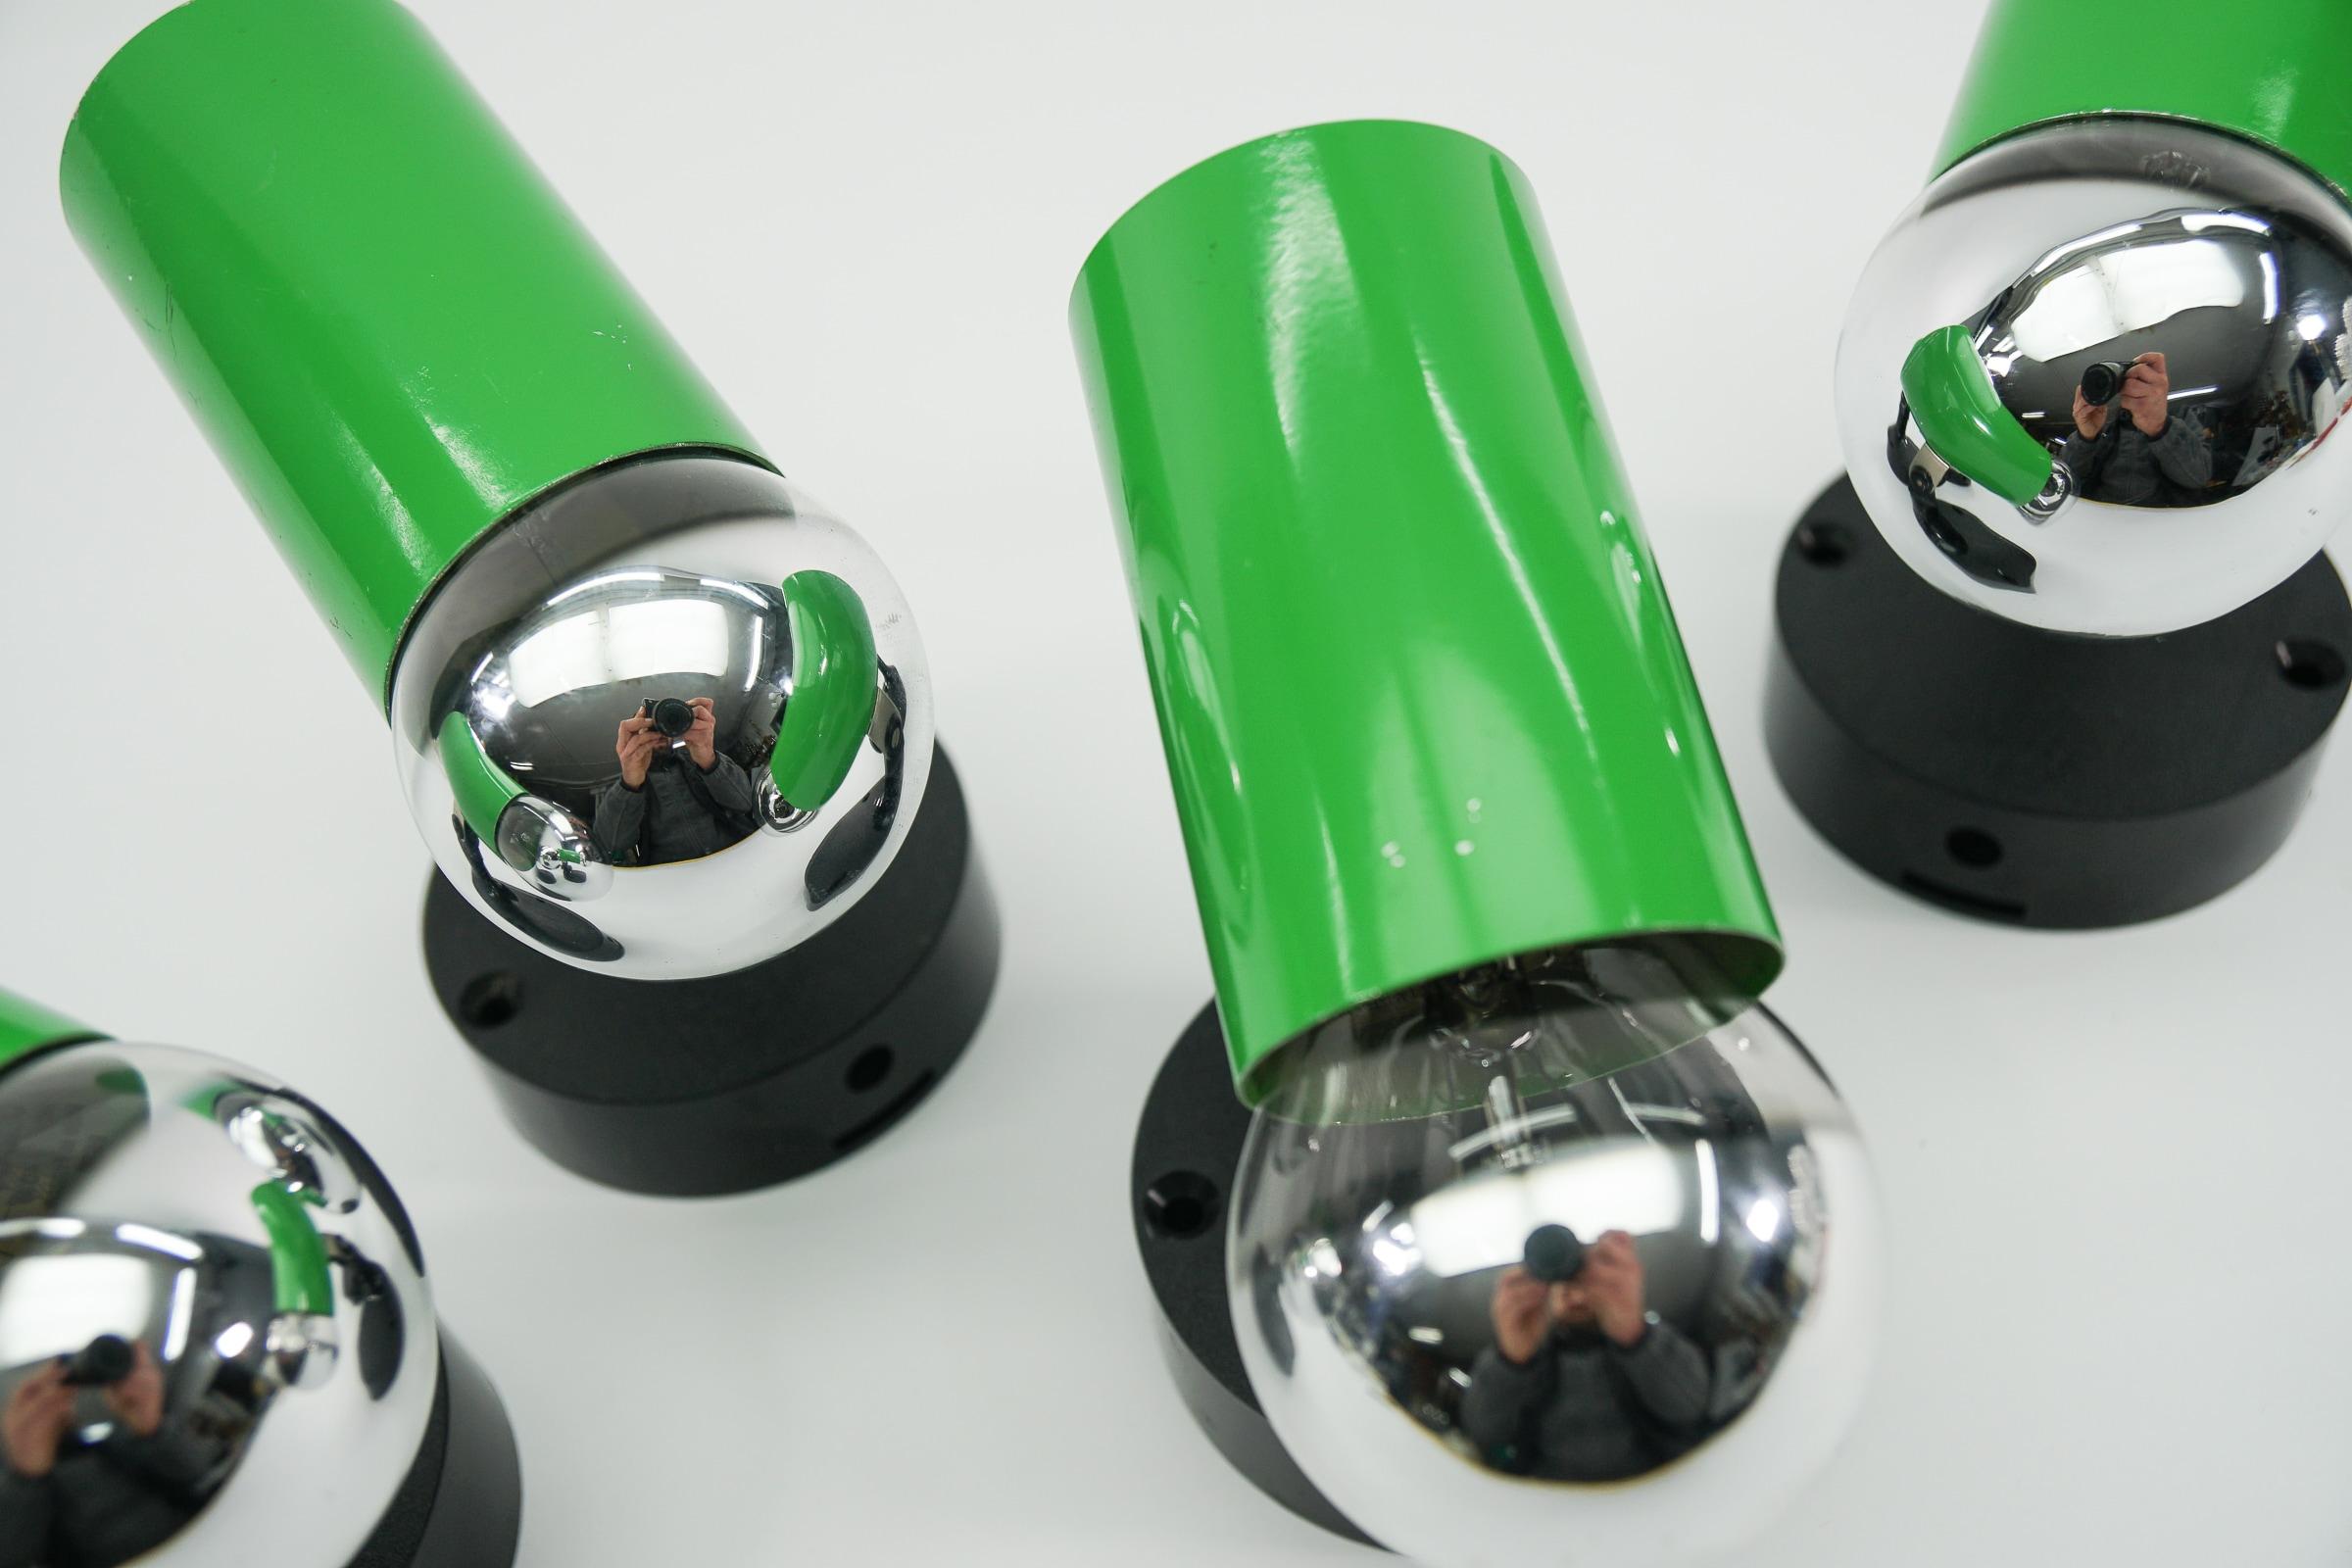 Set of 10 Green Wall or Ceiling Spot Lights by Massive, 1960s Belgium For Sale 1